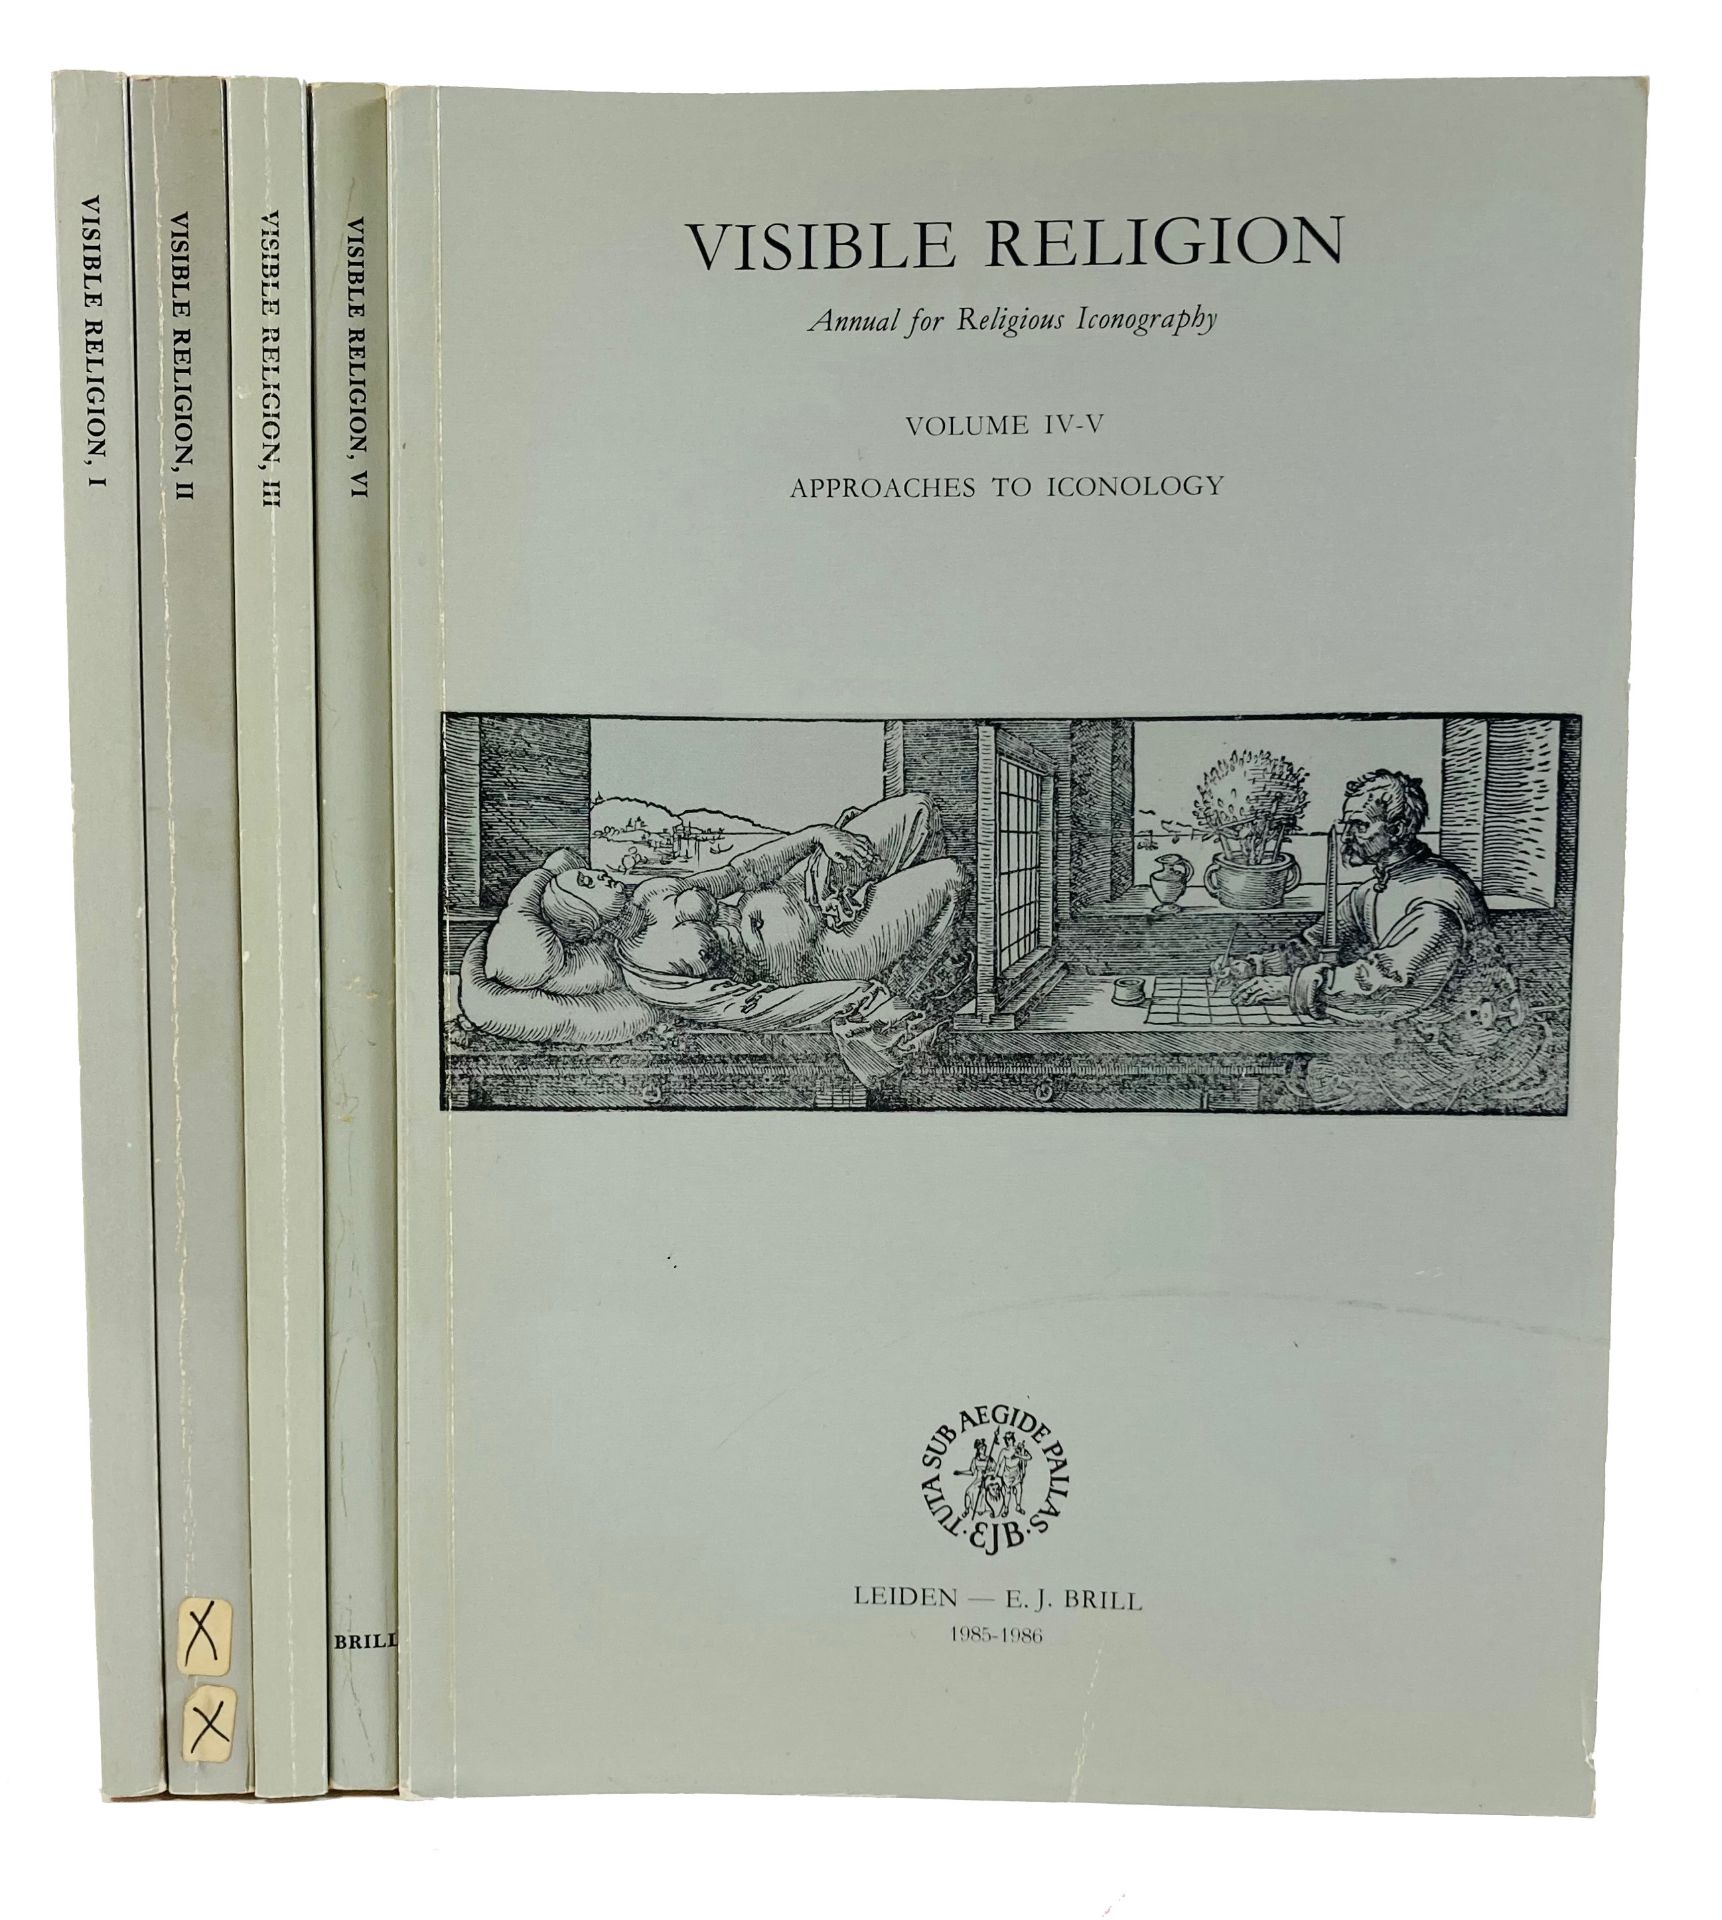 VISIBLE RELIGION. Annual for Religious Iconography. Vols. 1-6. Leiden, Brill, 1982-1988. 6